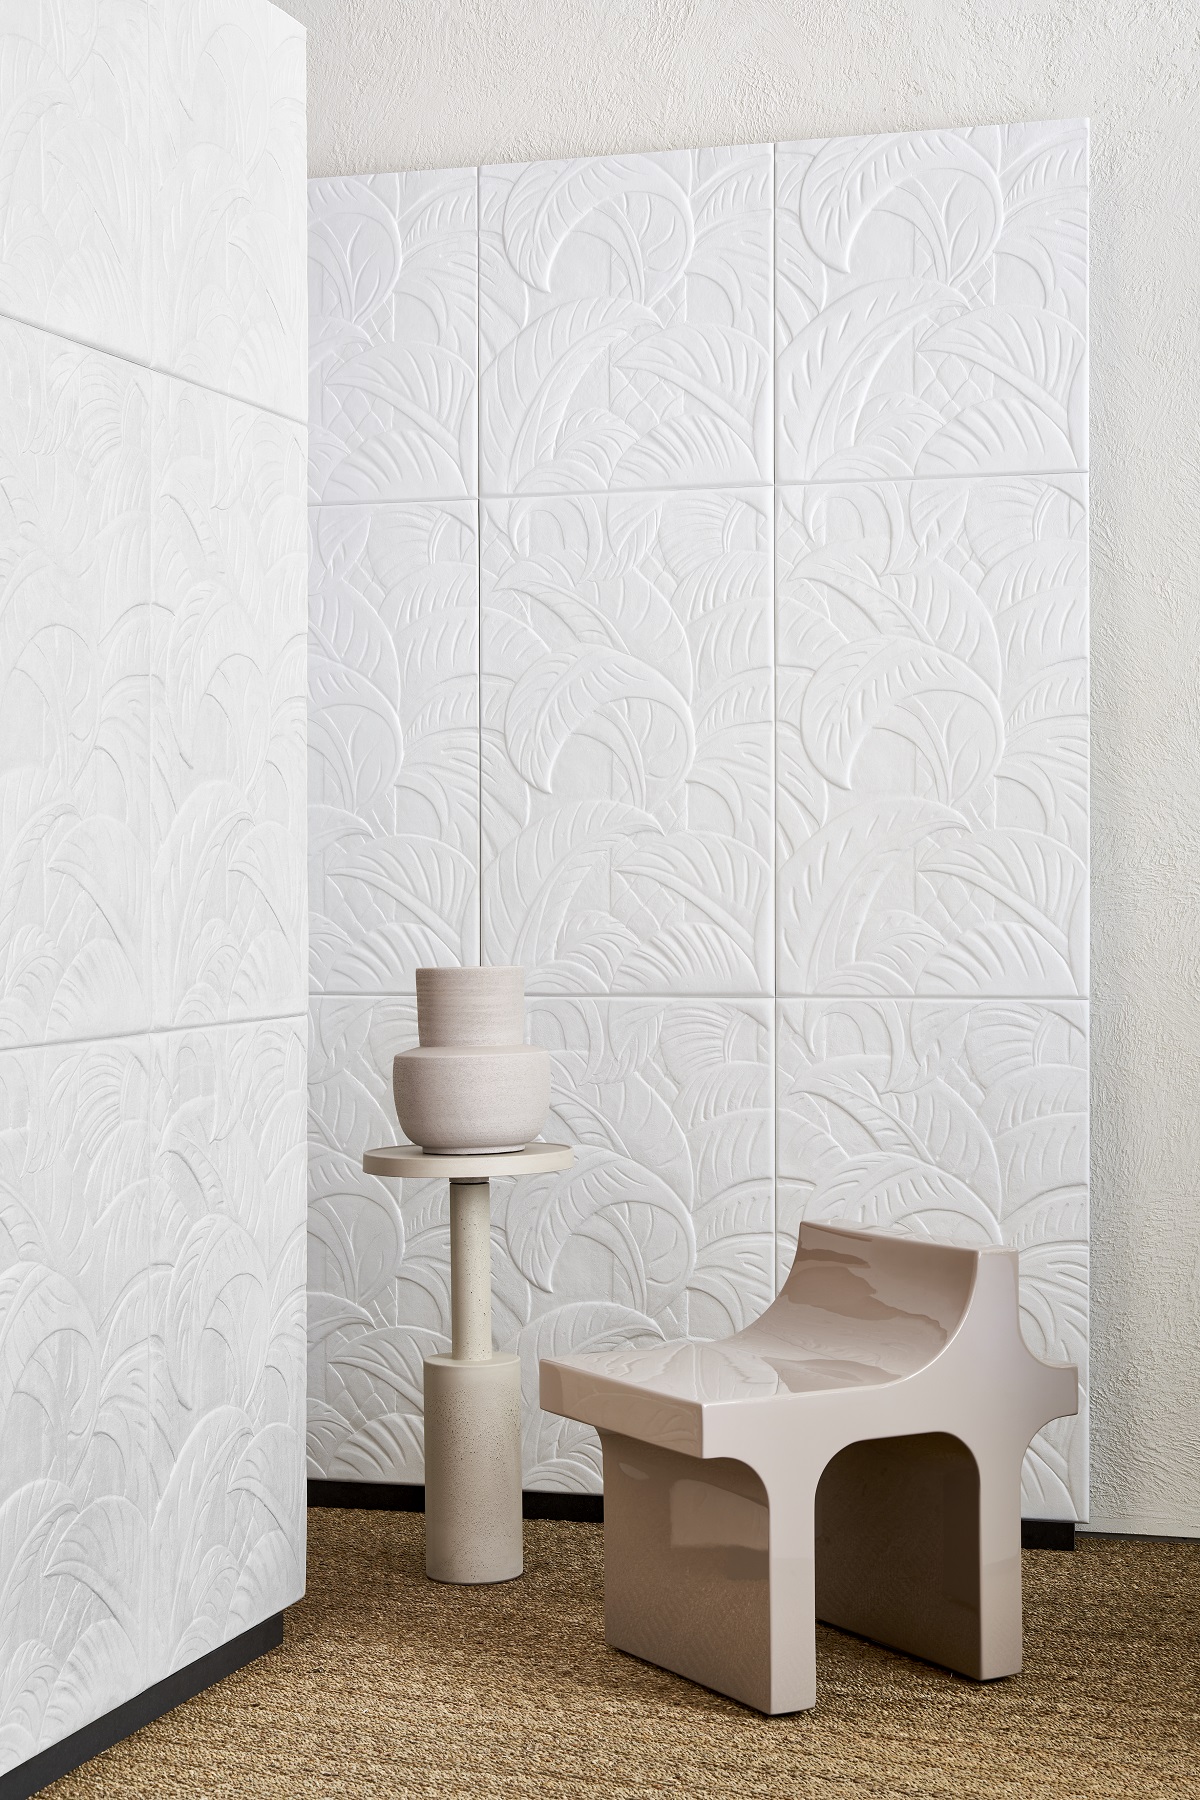 contemporary cream coloured chair and pot in front of white relief wallcovering covered with foliage